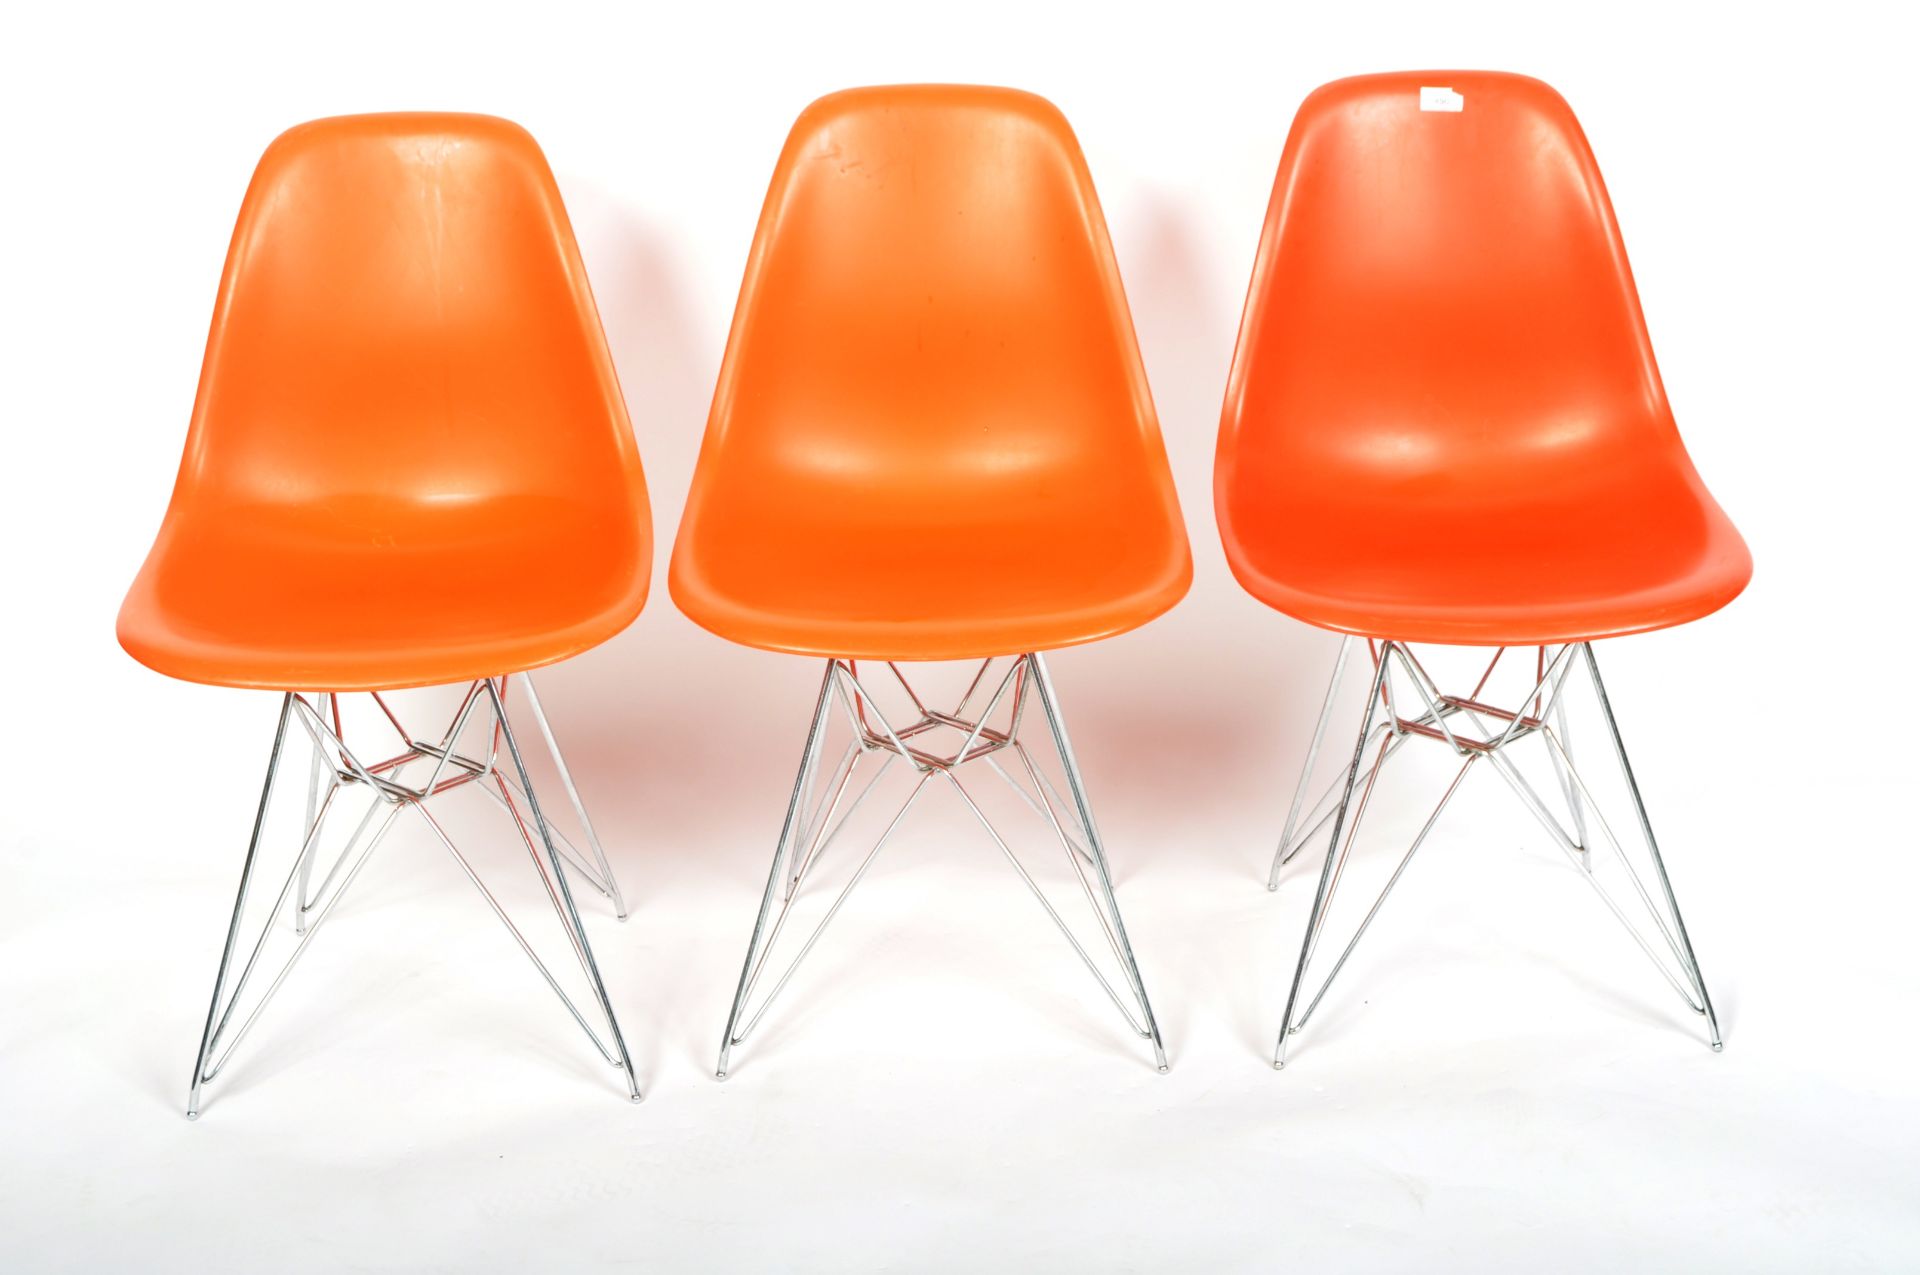 CHARLES & RAY EAMES FOR VITRA - SET OF SIX DSR EAMES PLASTIC CHAIRS - Image 2 of 10